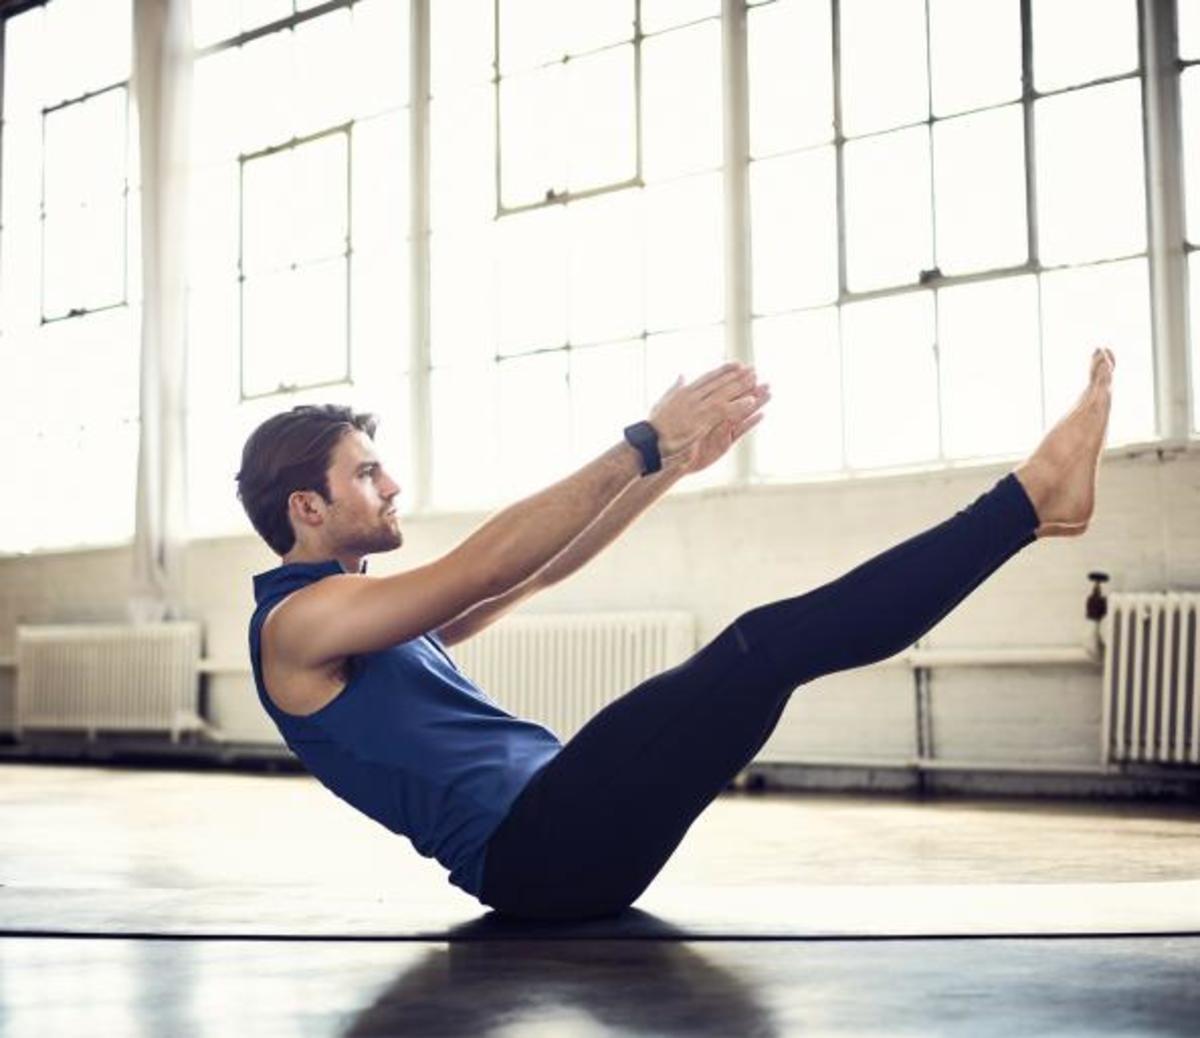 7 Unconventional Workouts That Torch Fat and Sculpt Muscle - Men's Journal